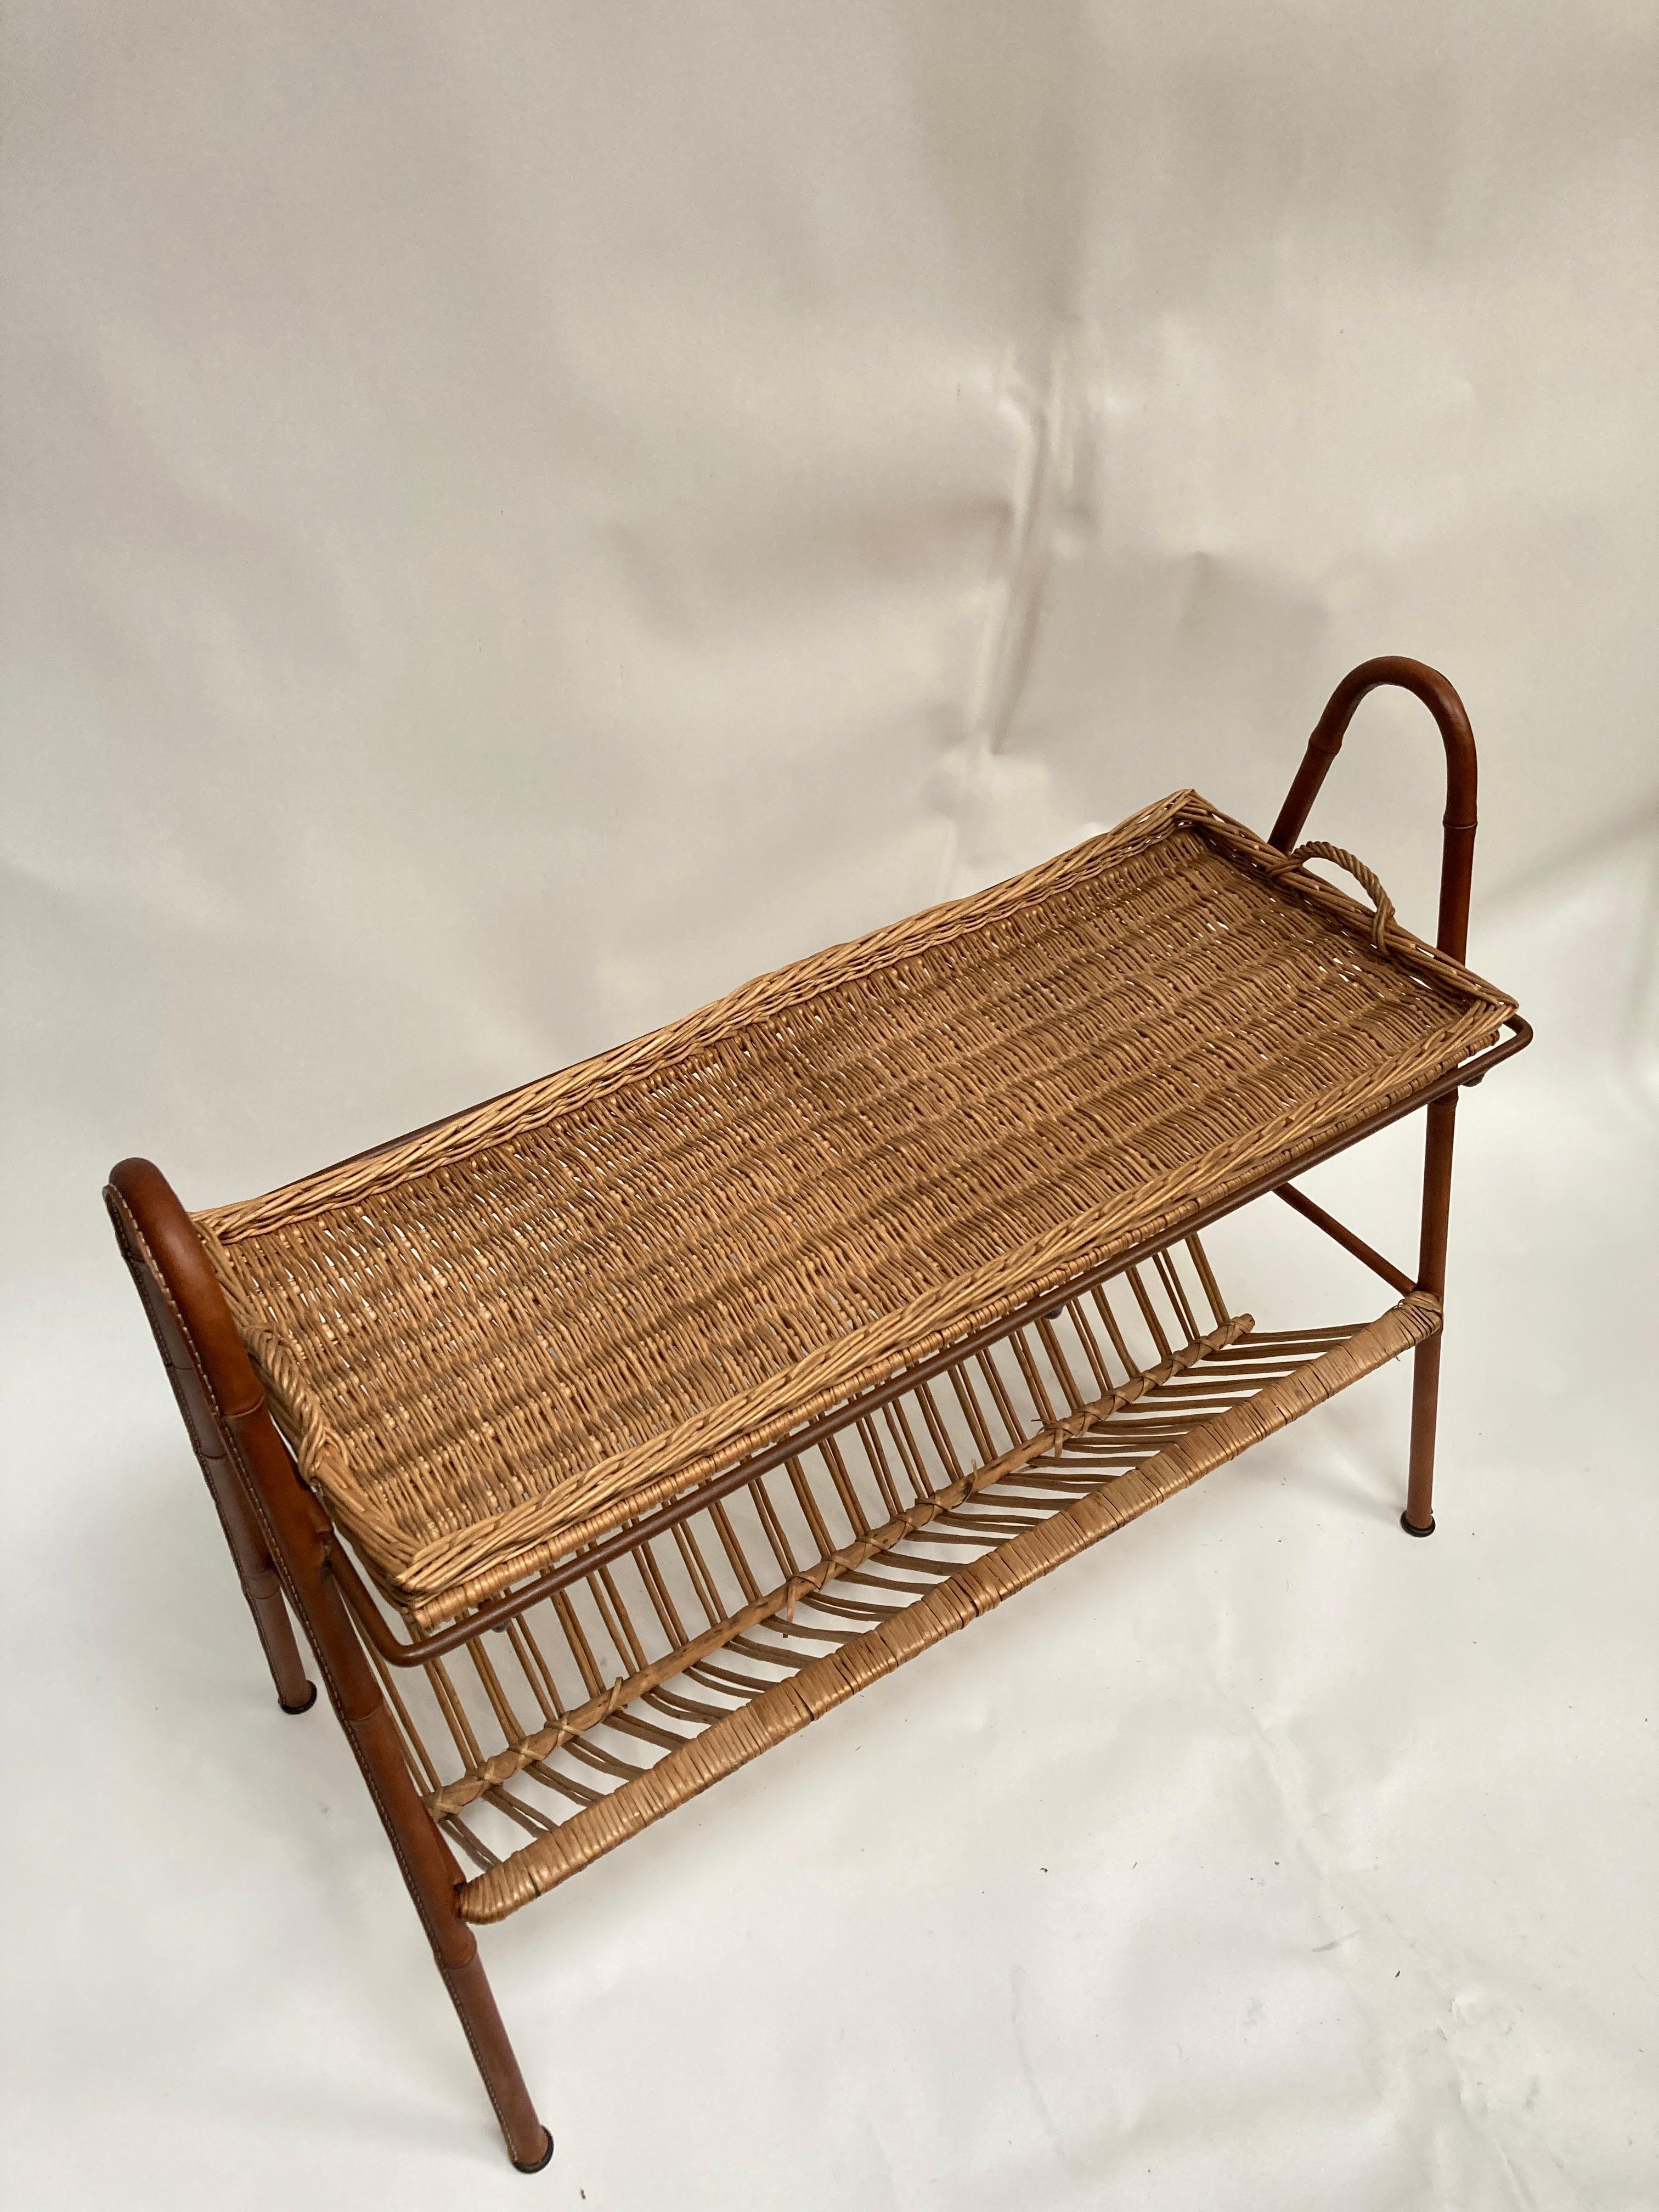 1950's Stitched leather and rattan table by Jacques Adnet
The higher top is a tray with two handles on each side
Leather is in great condition
Rattan have a small accident on the low part 
Overall great condition
